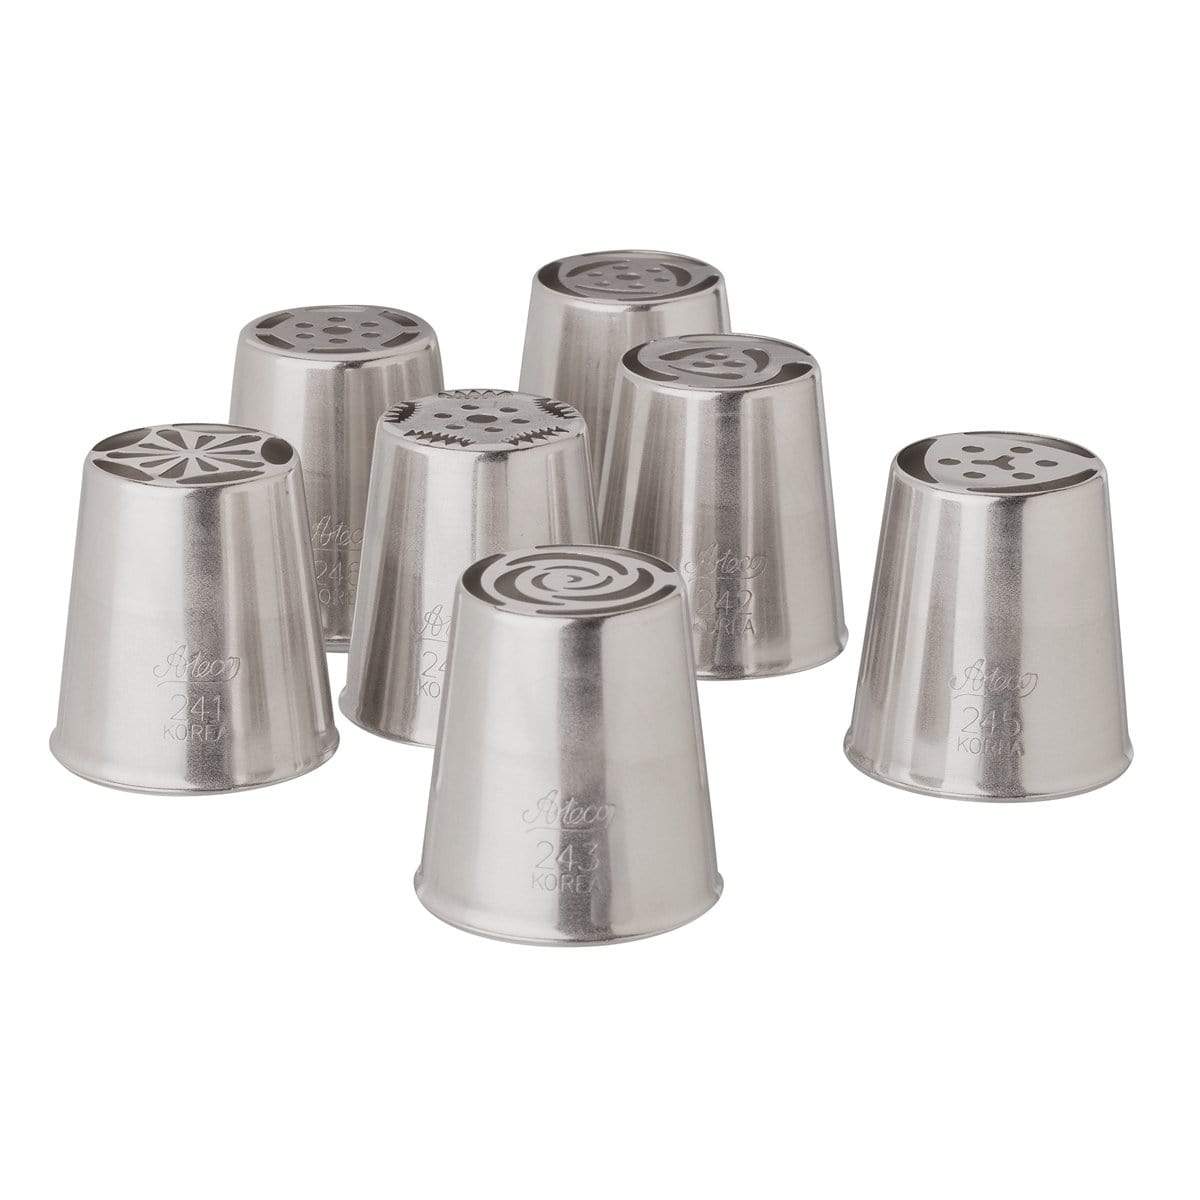 Ateco Piping Tip Ateco Russian Decorating Tubes (7 Piece Set)